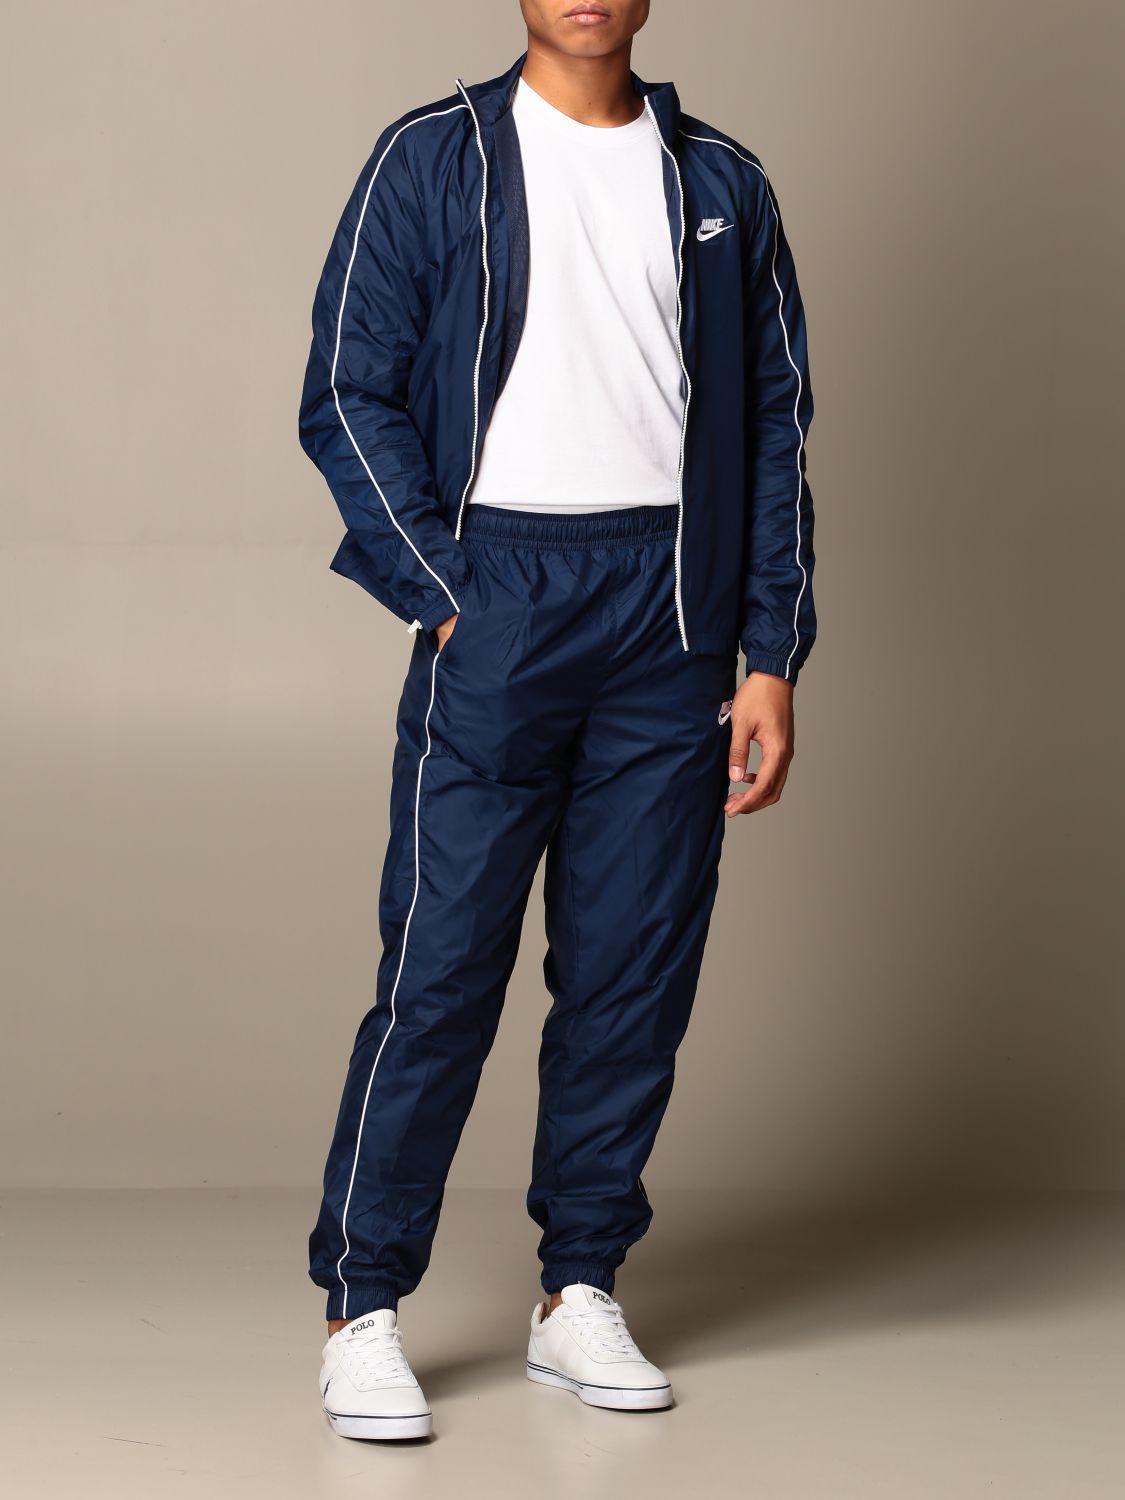 Nike Synthetic Tracksuit in Navy (Blue) for Men - Lyst